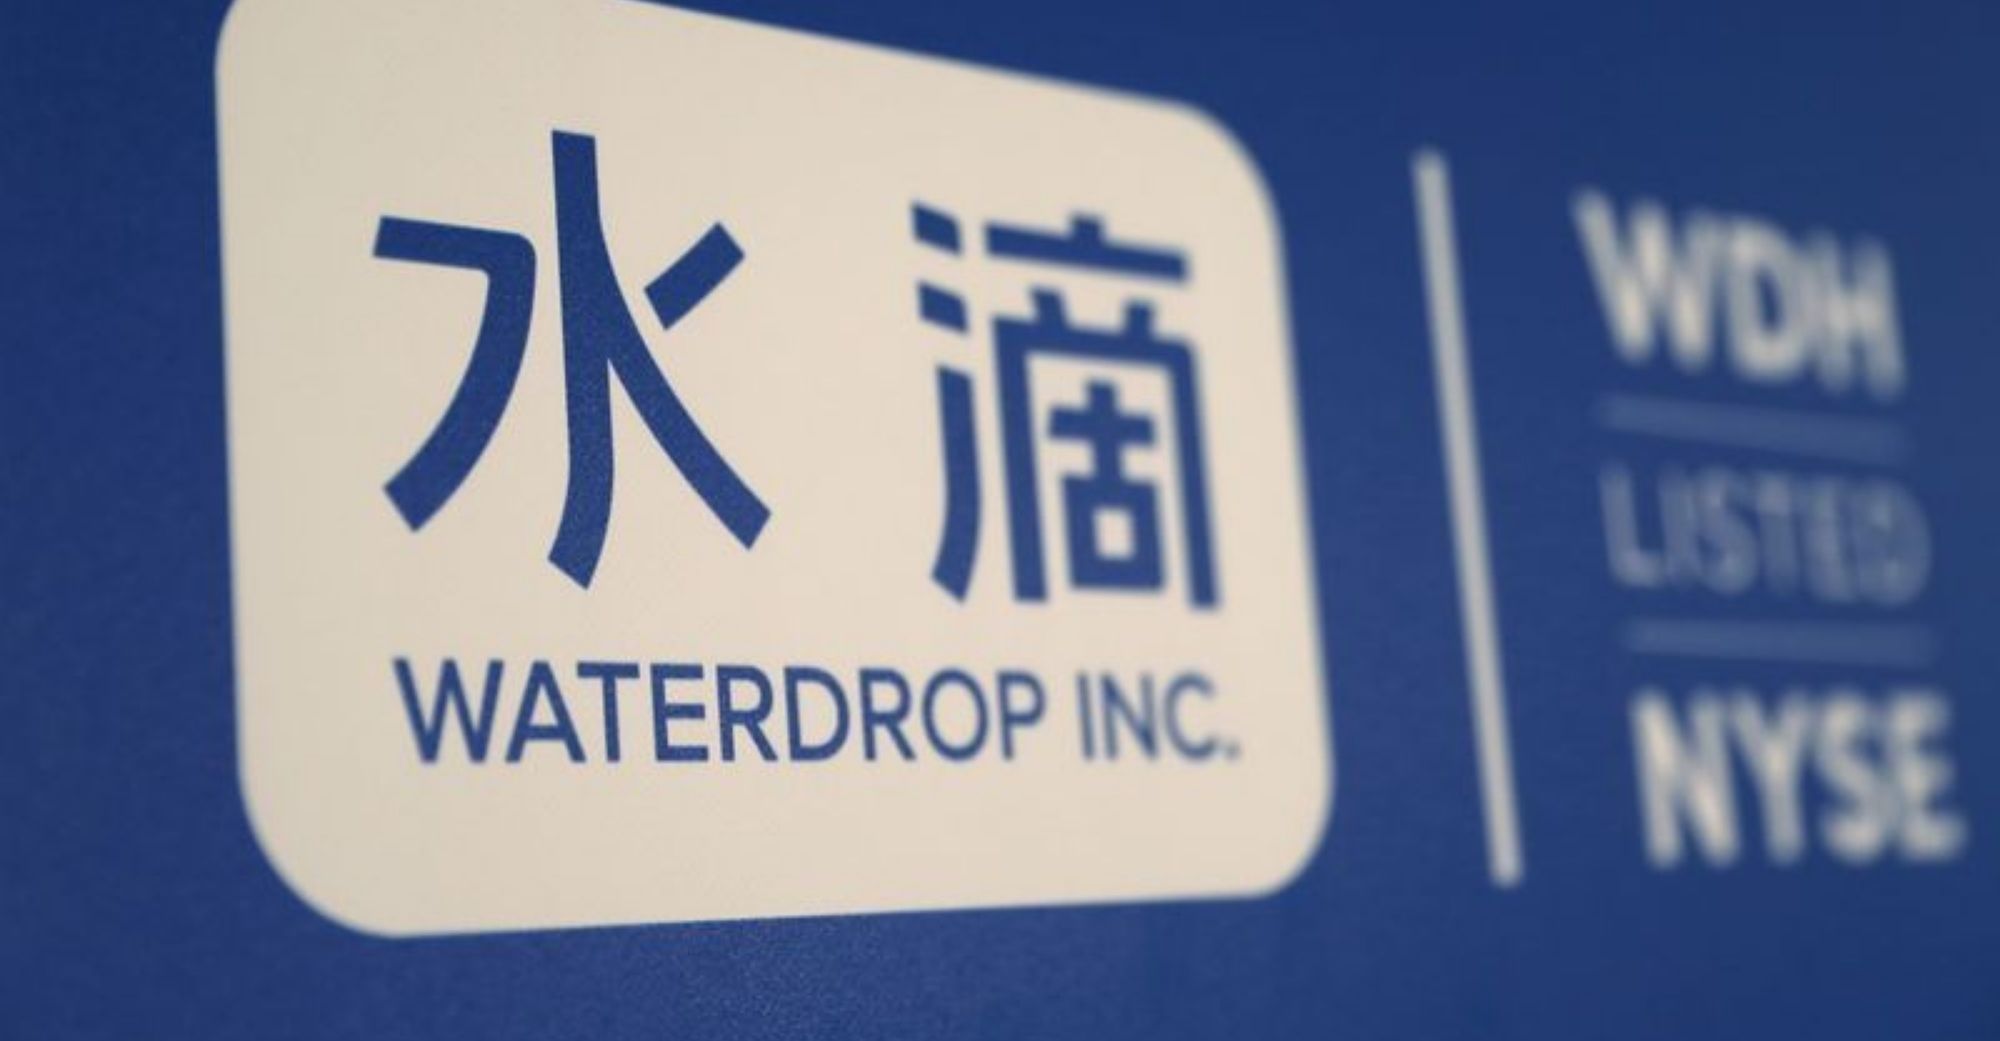 Waterdrop CFO Confident in the Growth Potential of Tech Based Insurance Industry